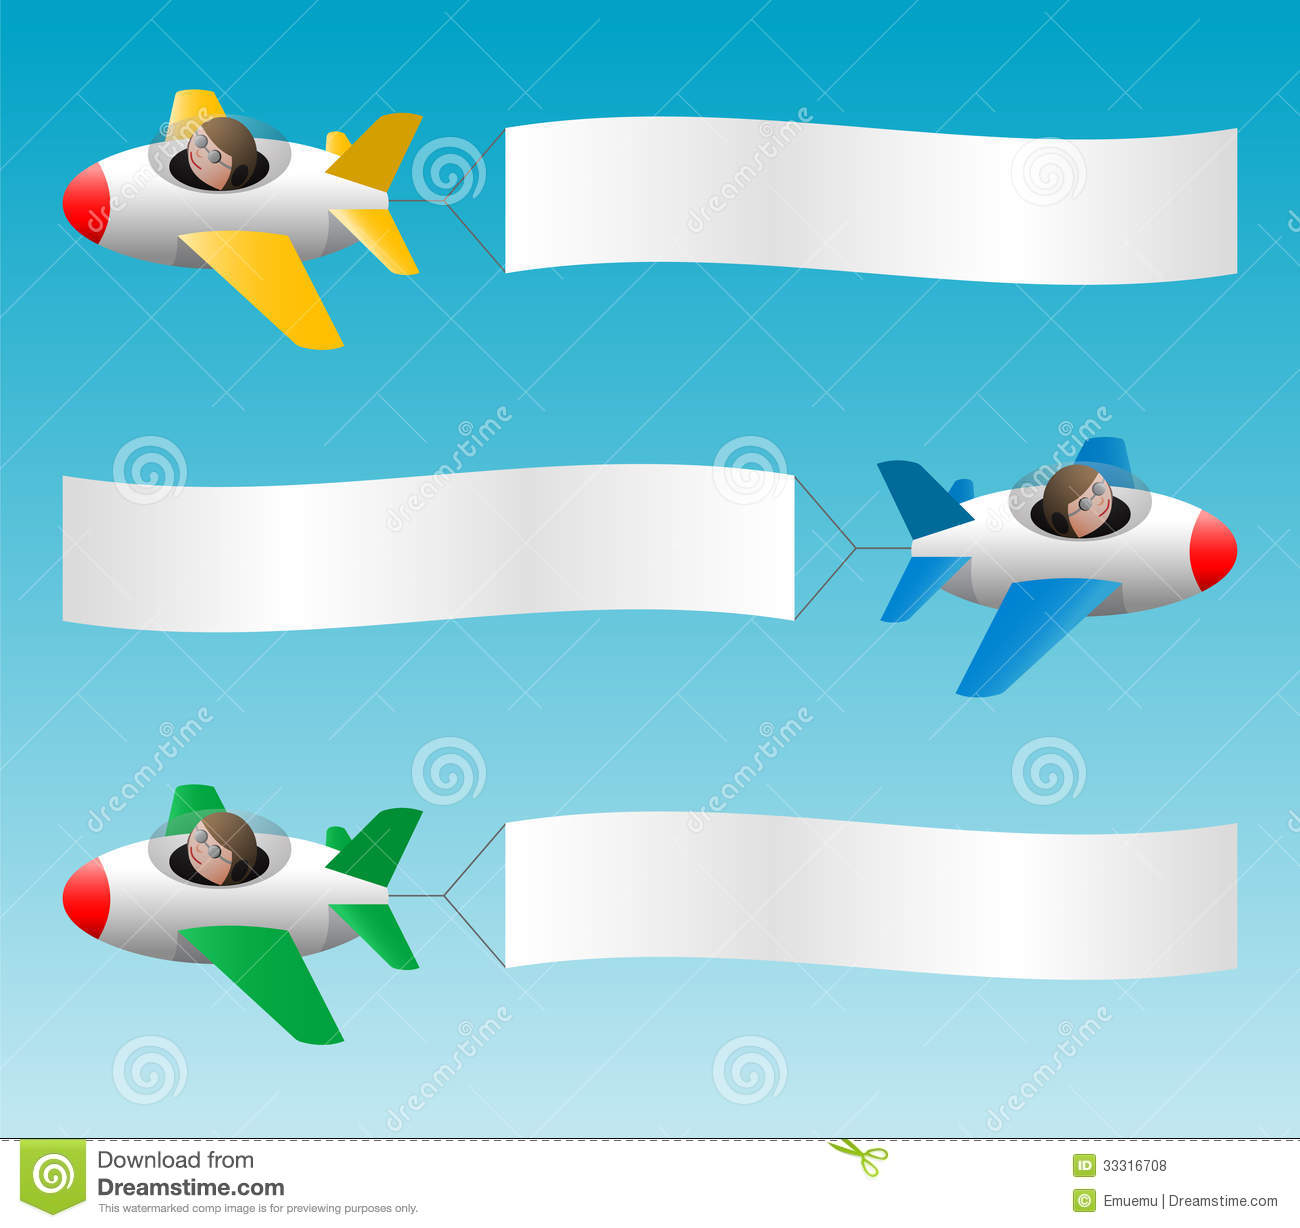 Three Planes Pull Banners Royalty Free Stock Photos   Image  33316708